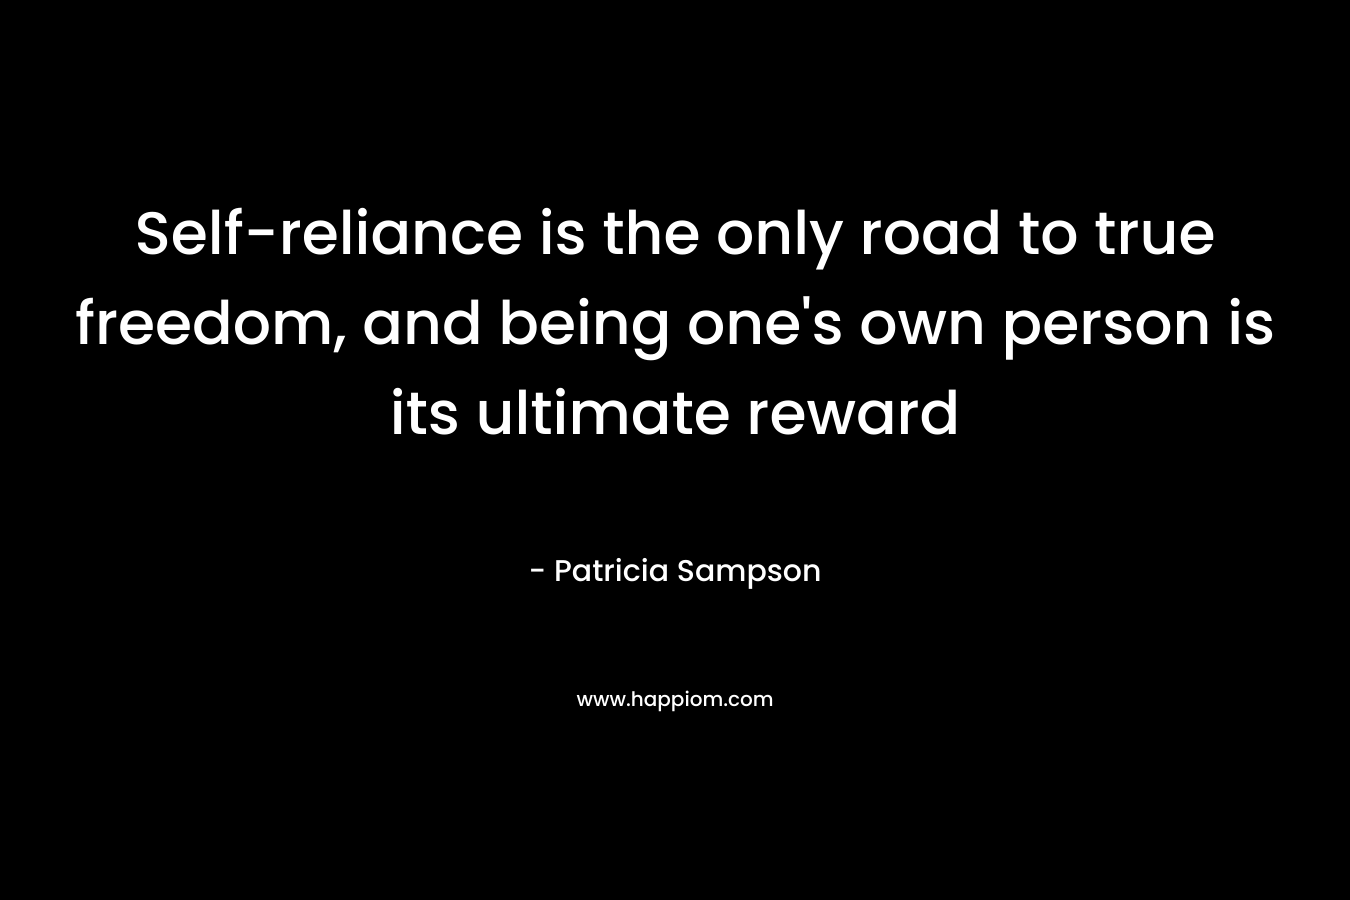 Self-reliance is the only road to true freedom, and being one’s own person is its ultimate reward – Patricia Sampson